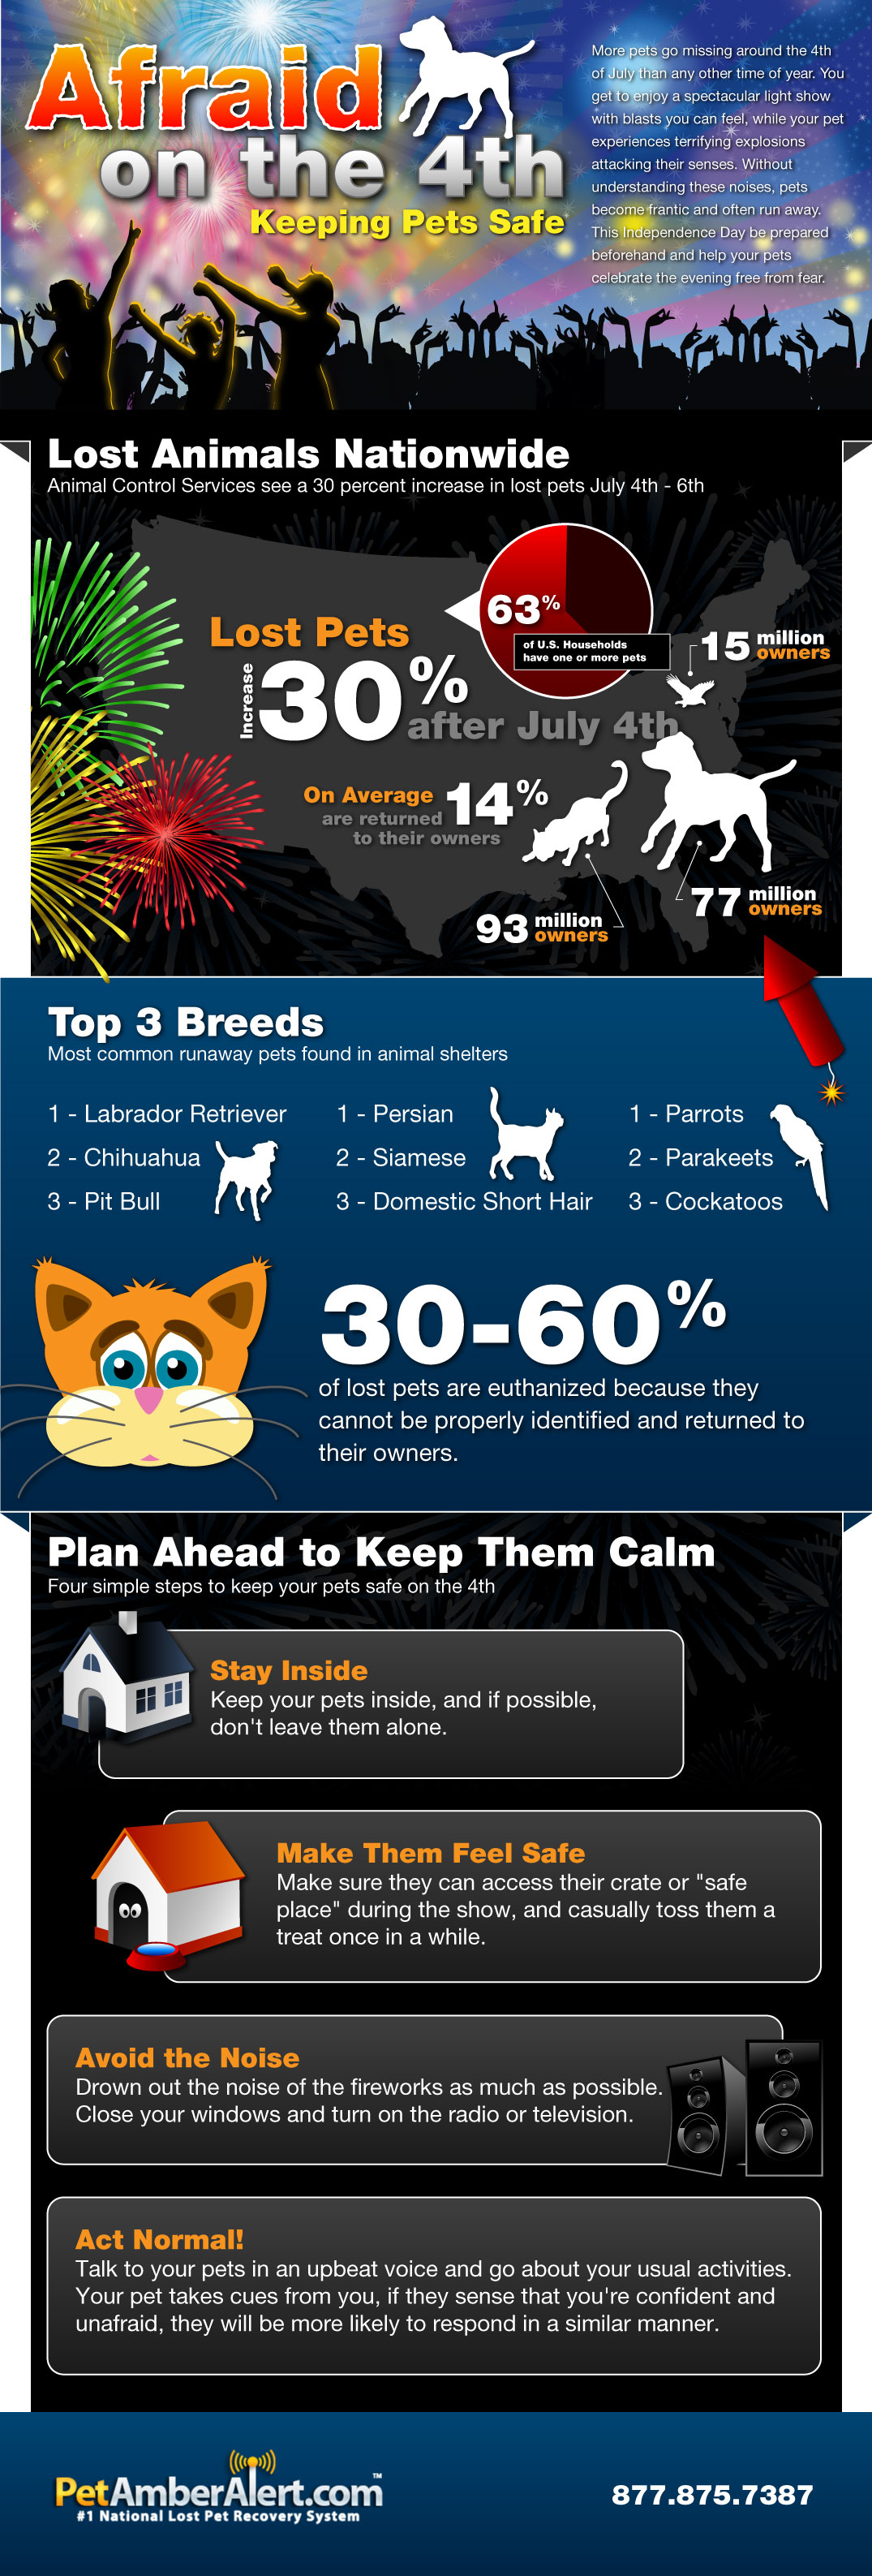 Keeping your pets save on the 4th of July with fireworks.